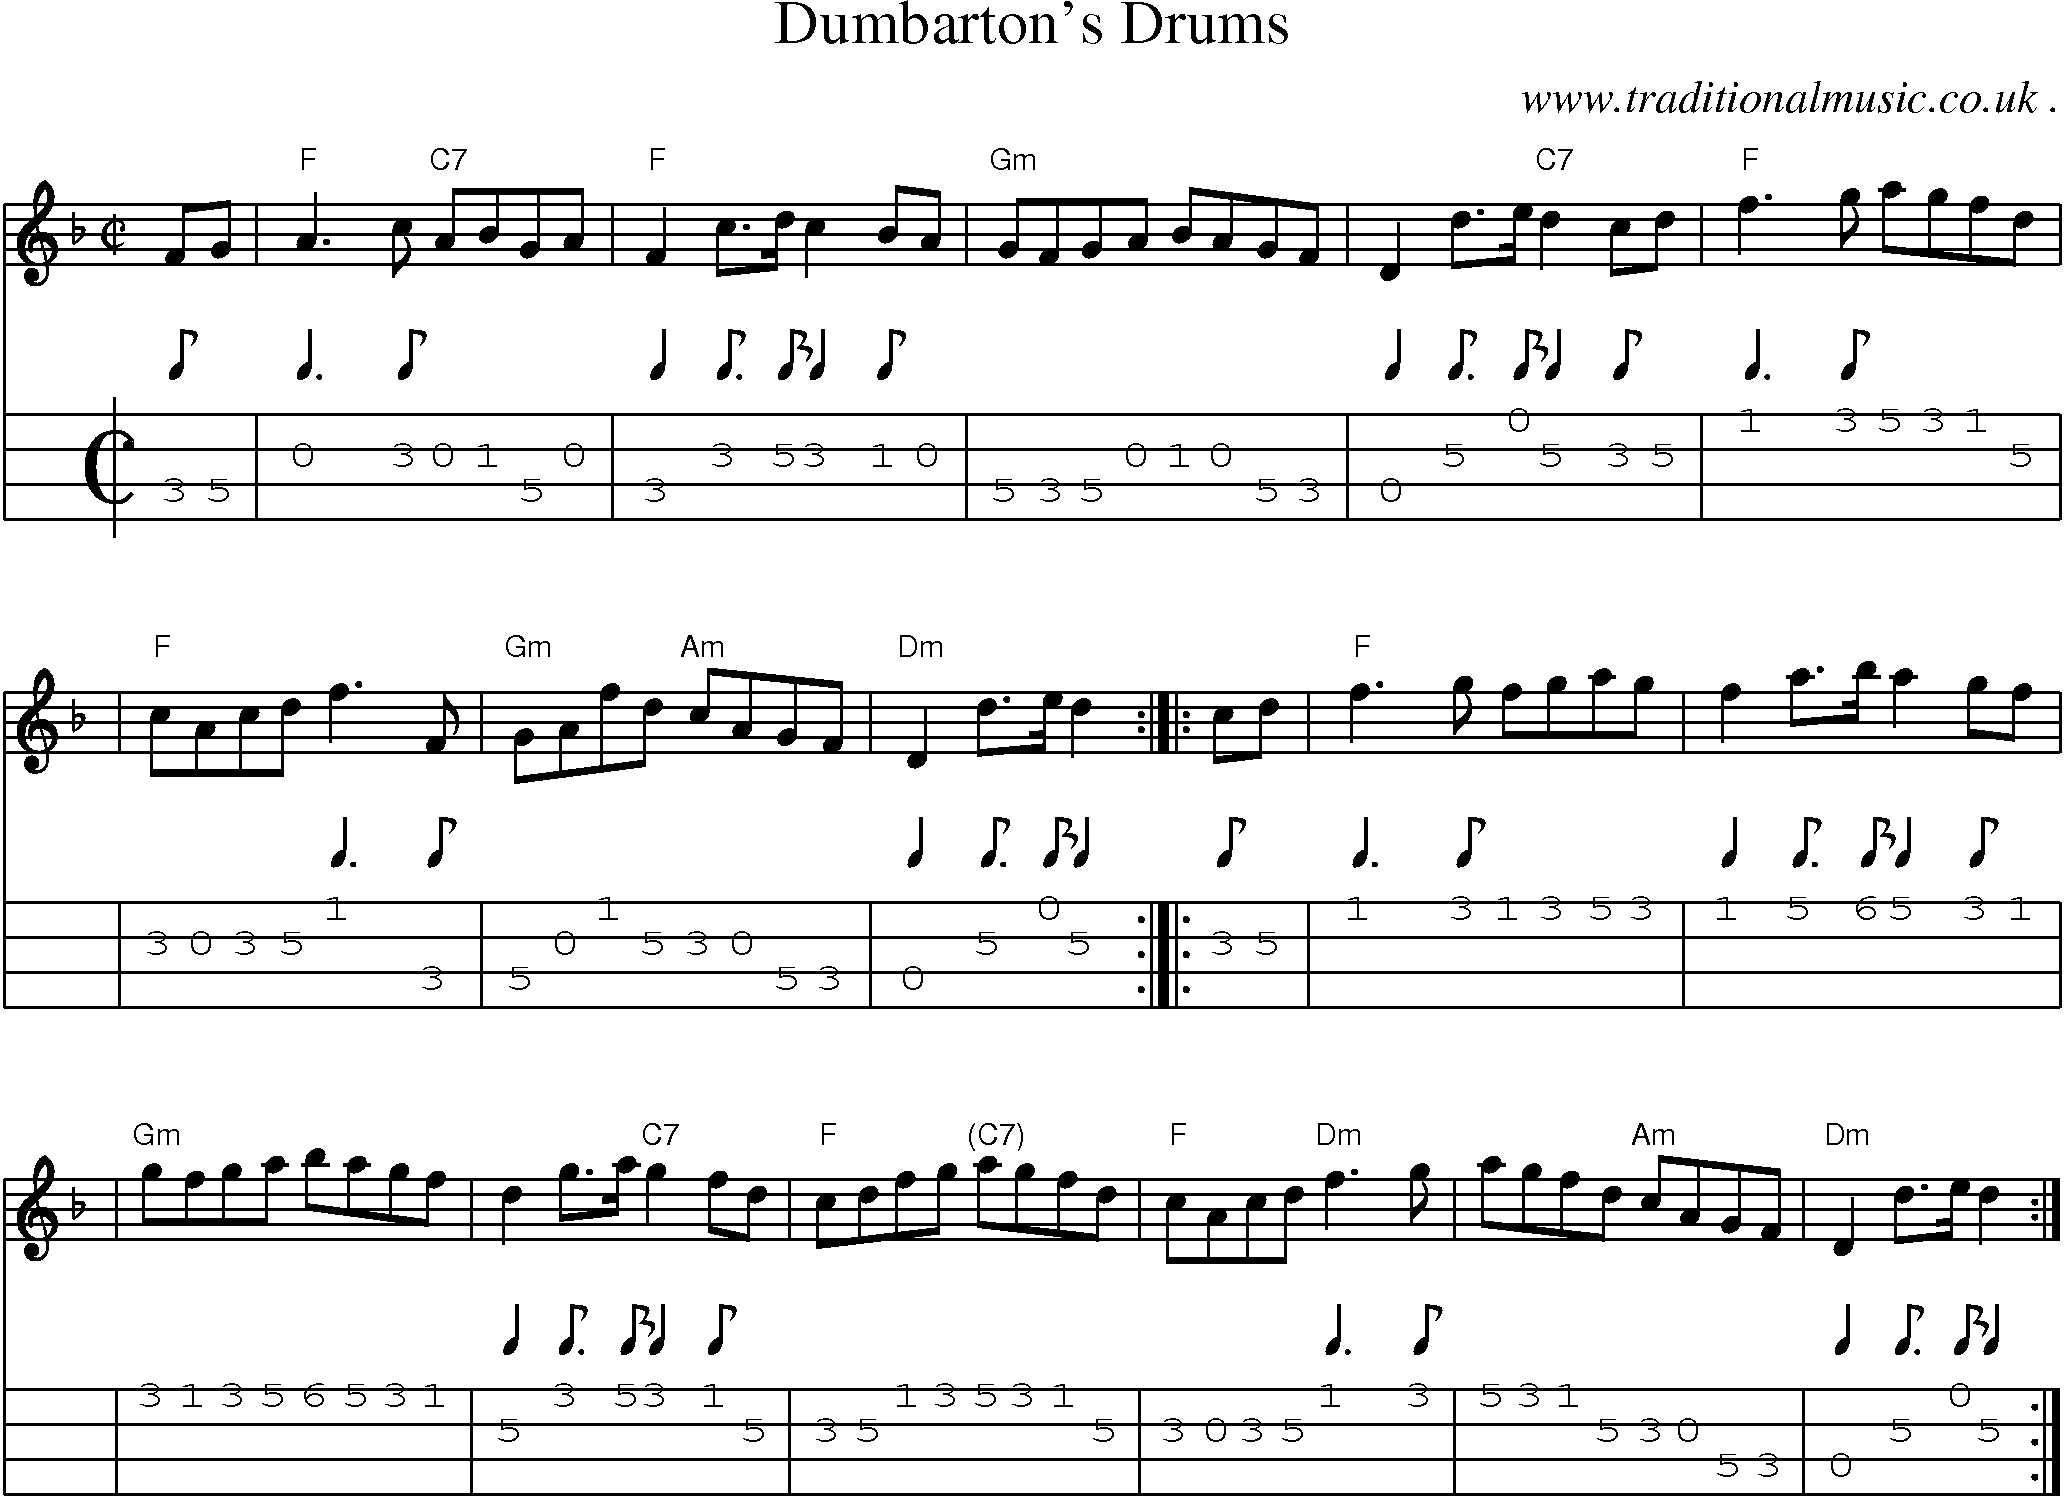 Sheet-music  score, Chords and Mandolin Tabs for Dumbartons Drums